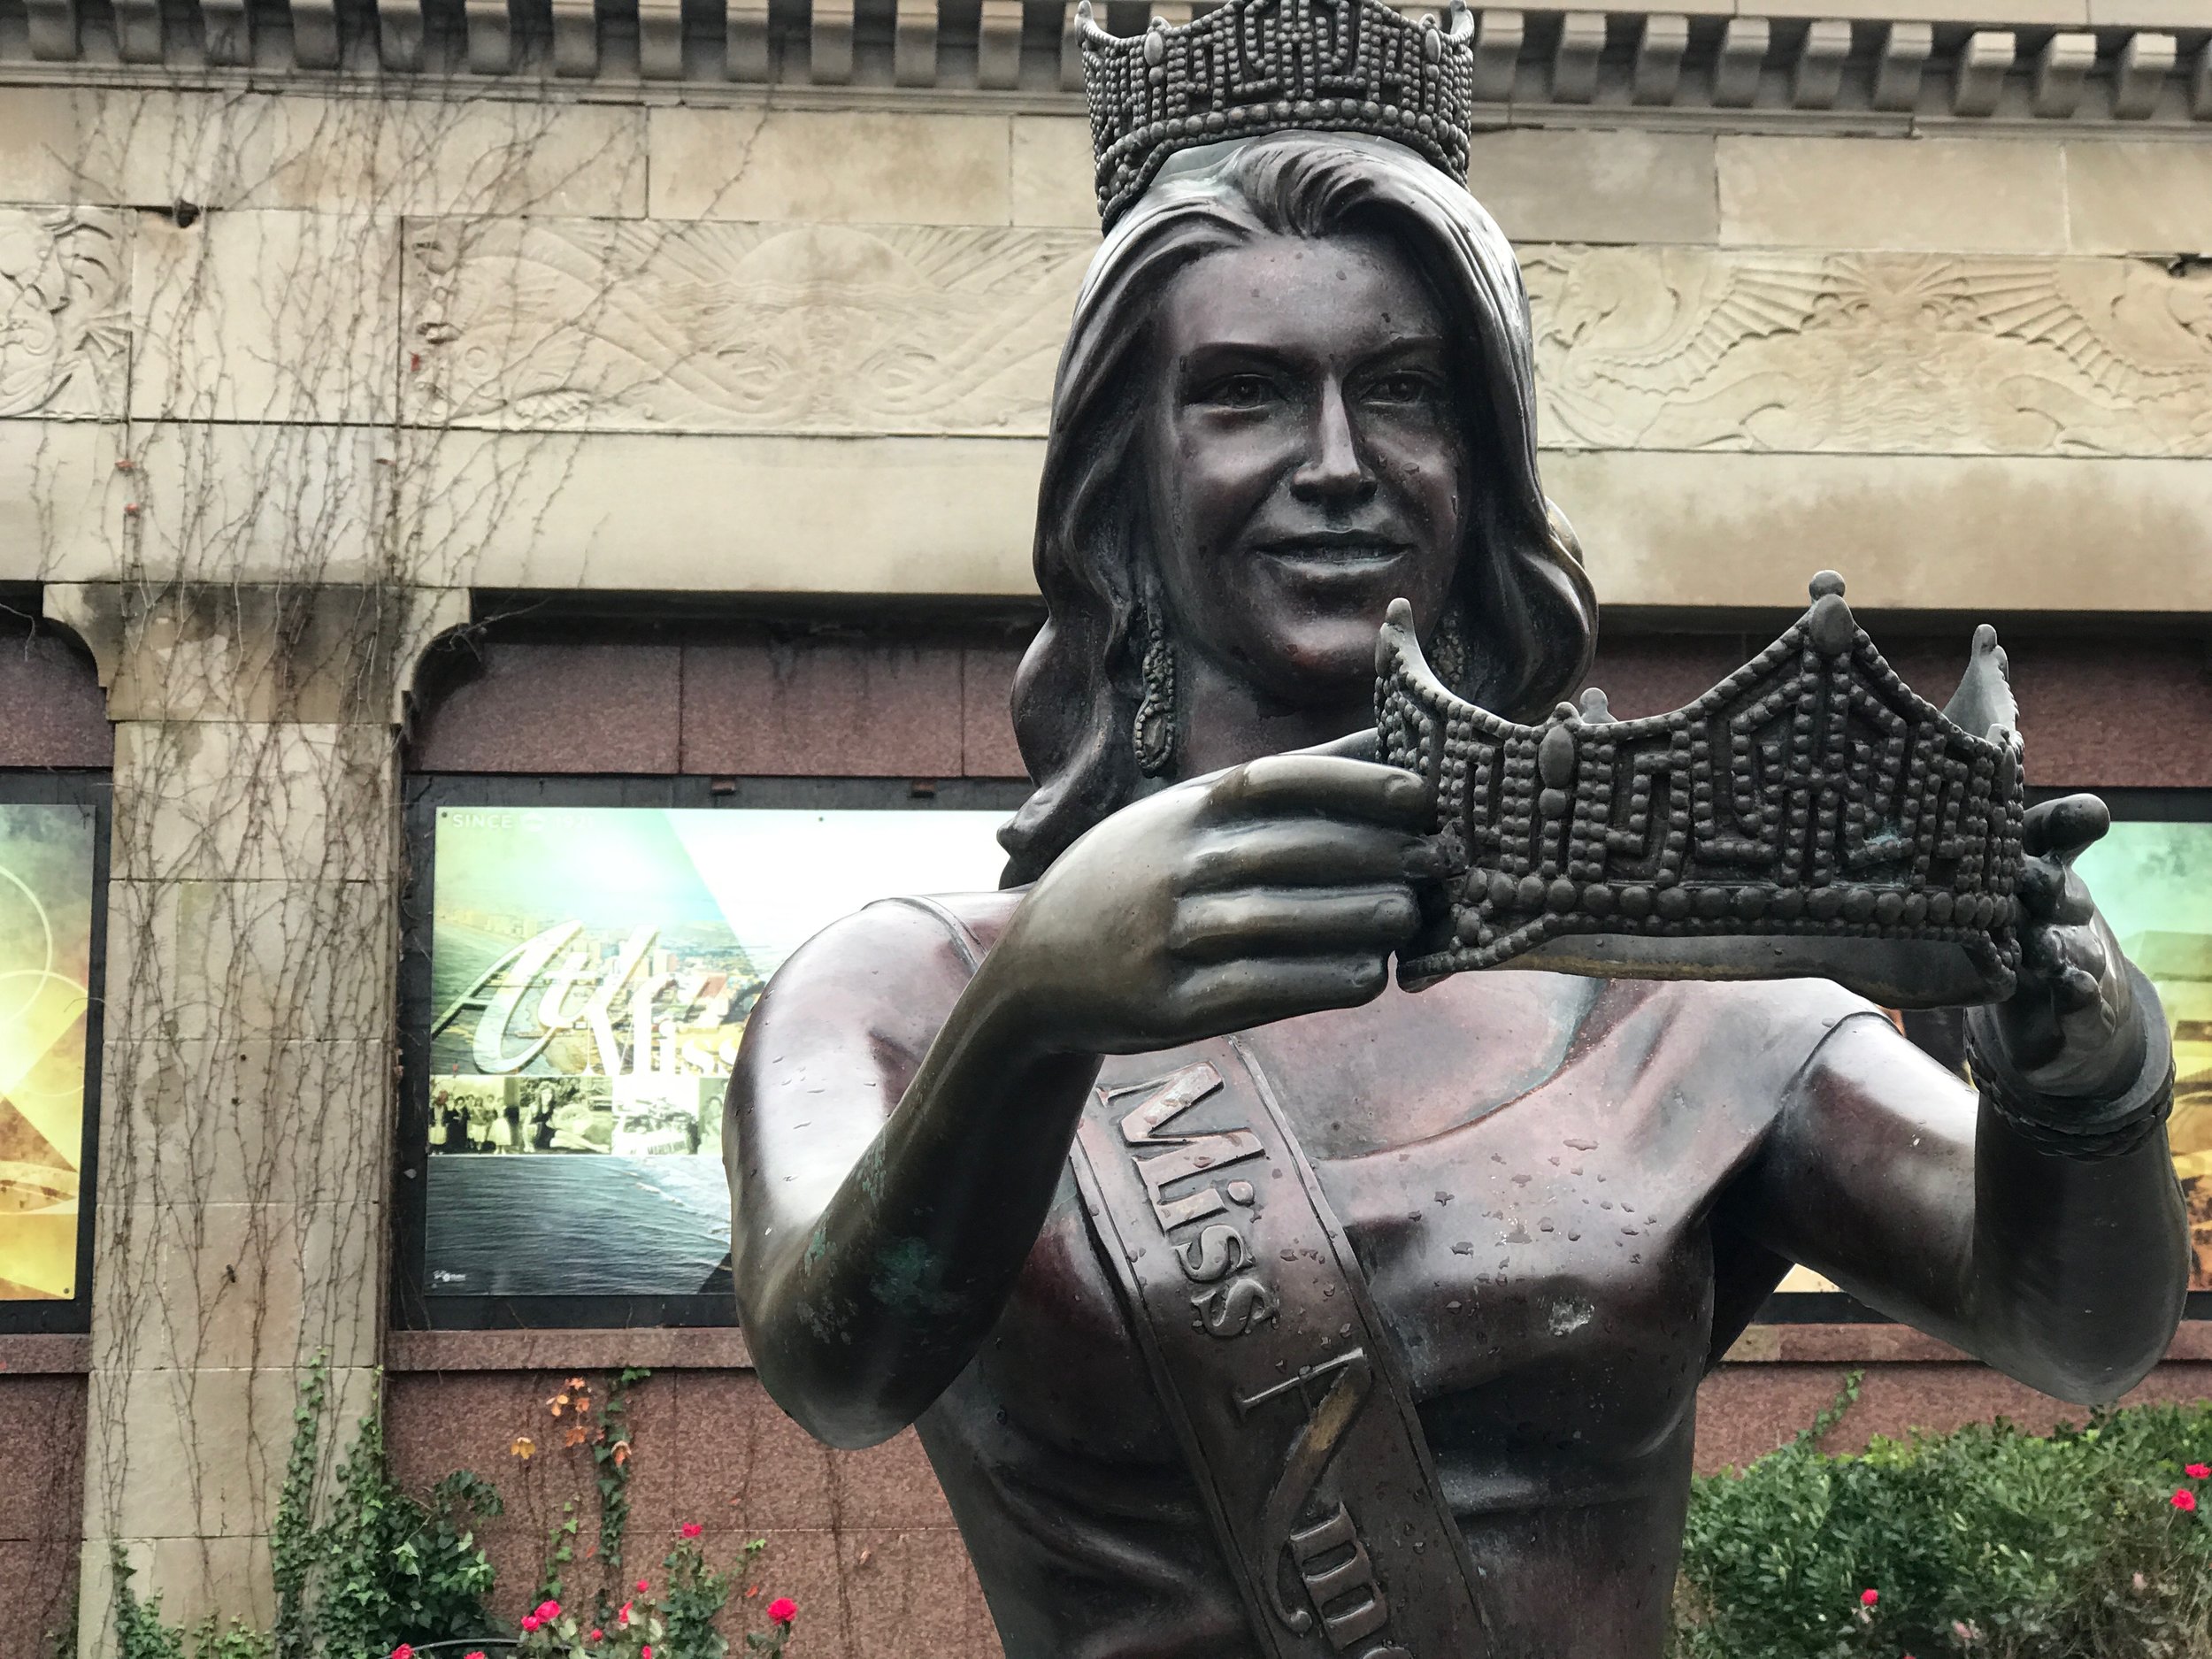  A statue of Miss America decorates the plaza in front of Boardwalk Hall. The pageant has been a marketing bonanza for Atlantic City since 1921.      